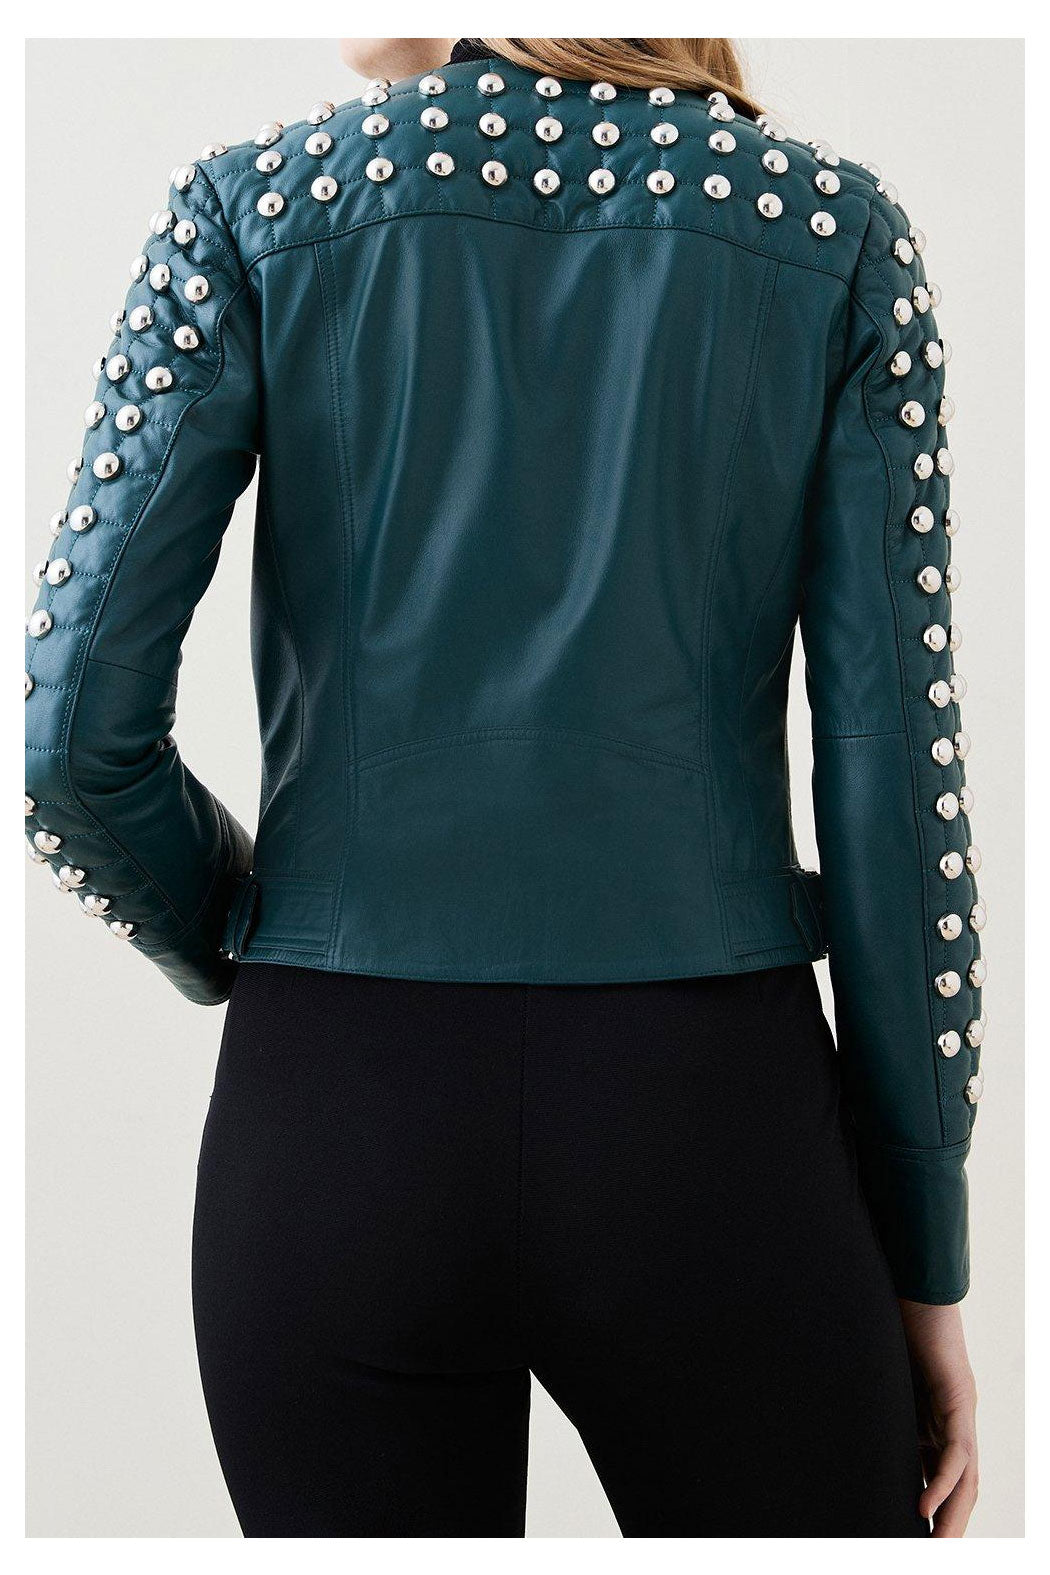 Women Style Silver Spiked Studded Motorcycle Leather Jacket With Chocolat Green